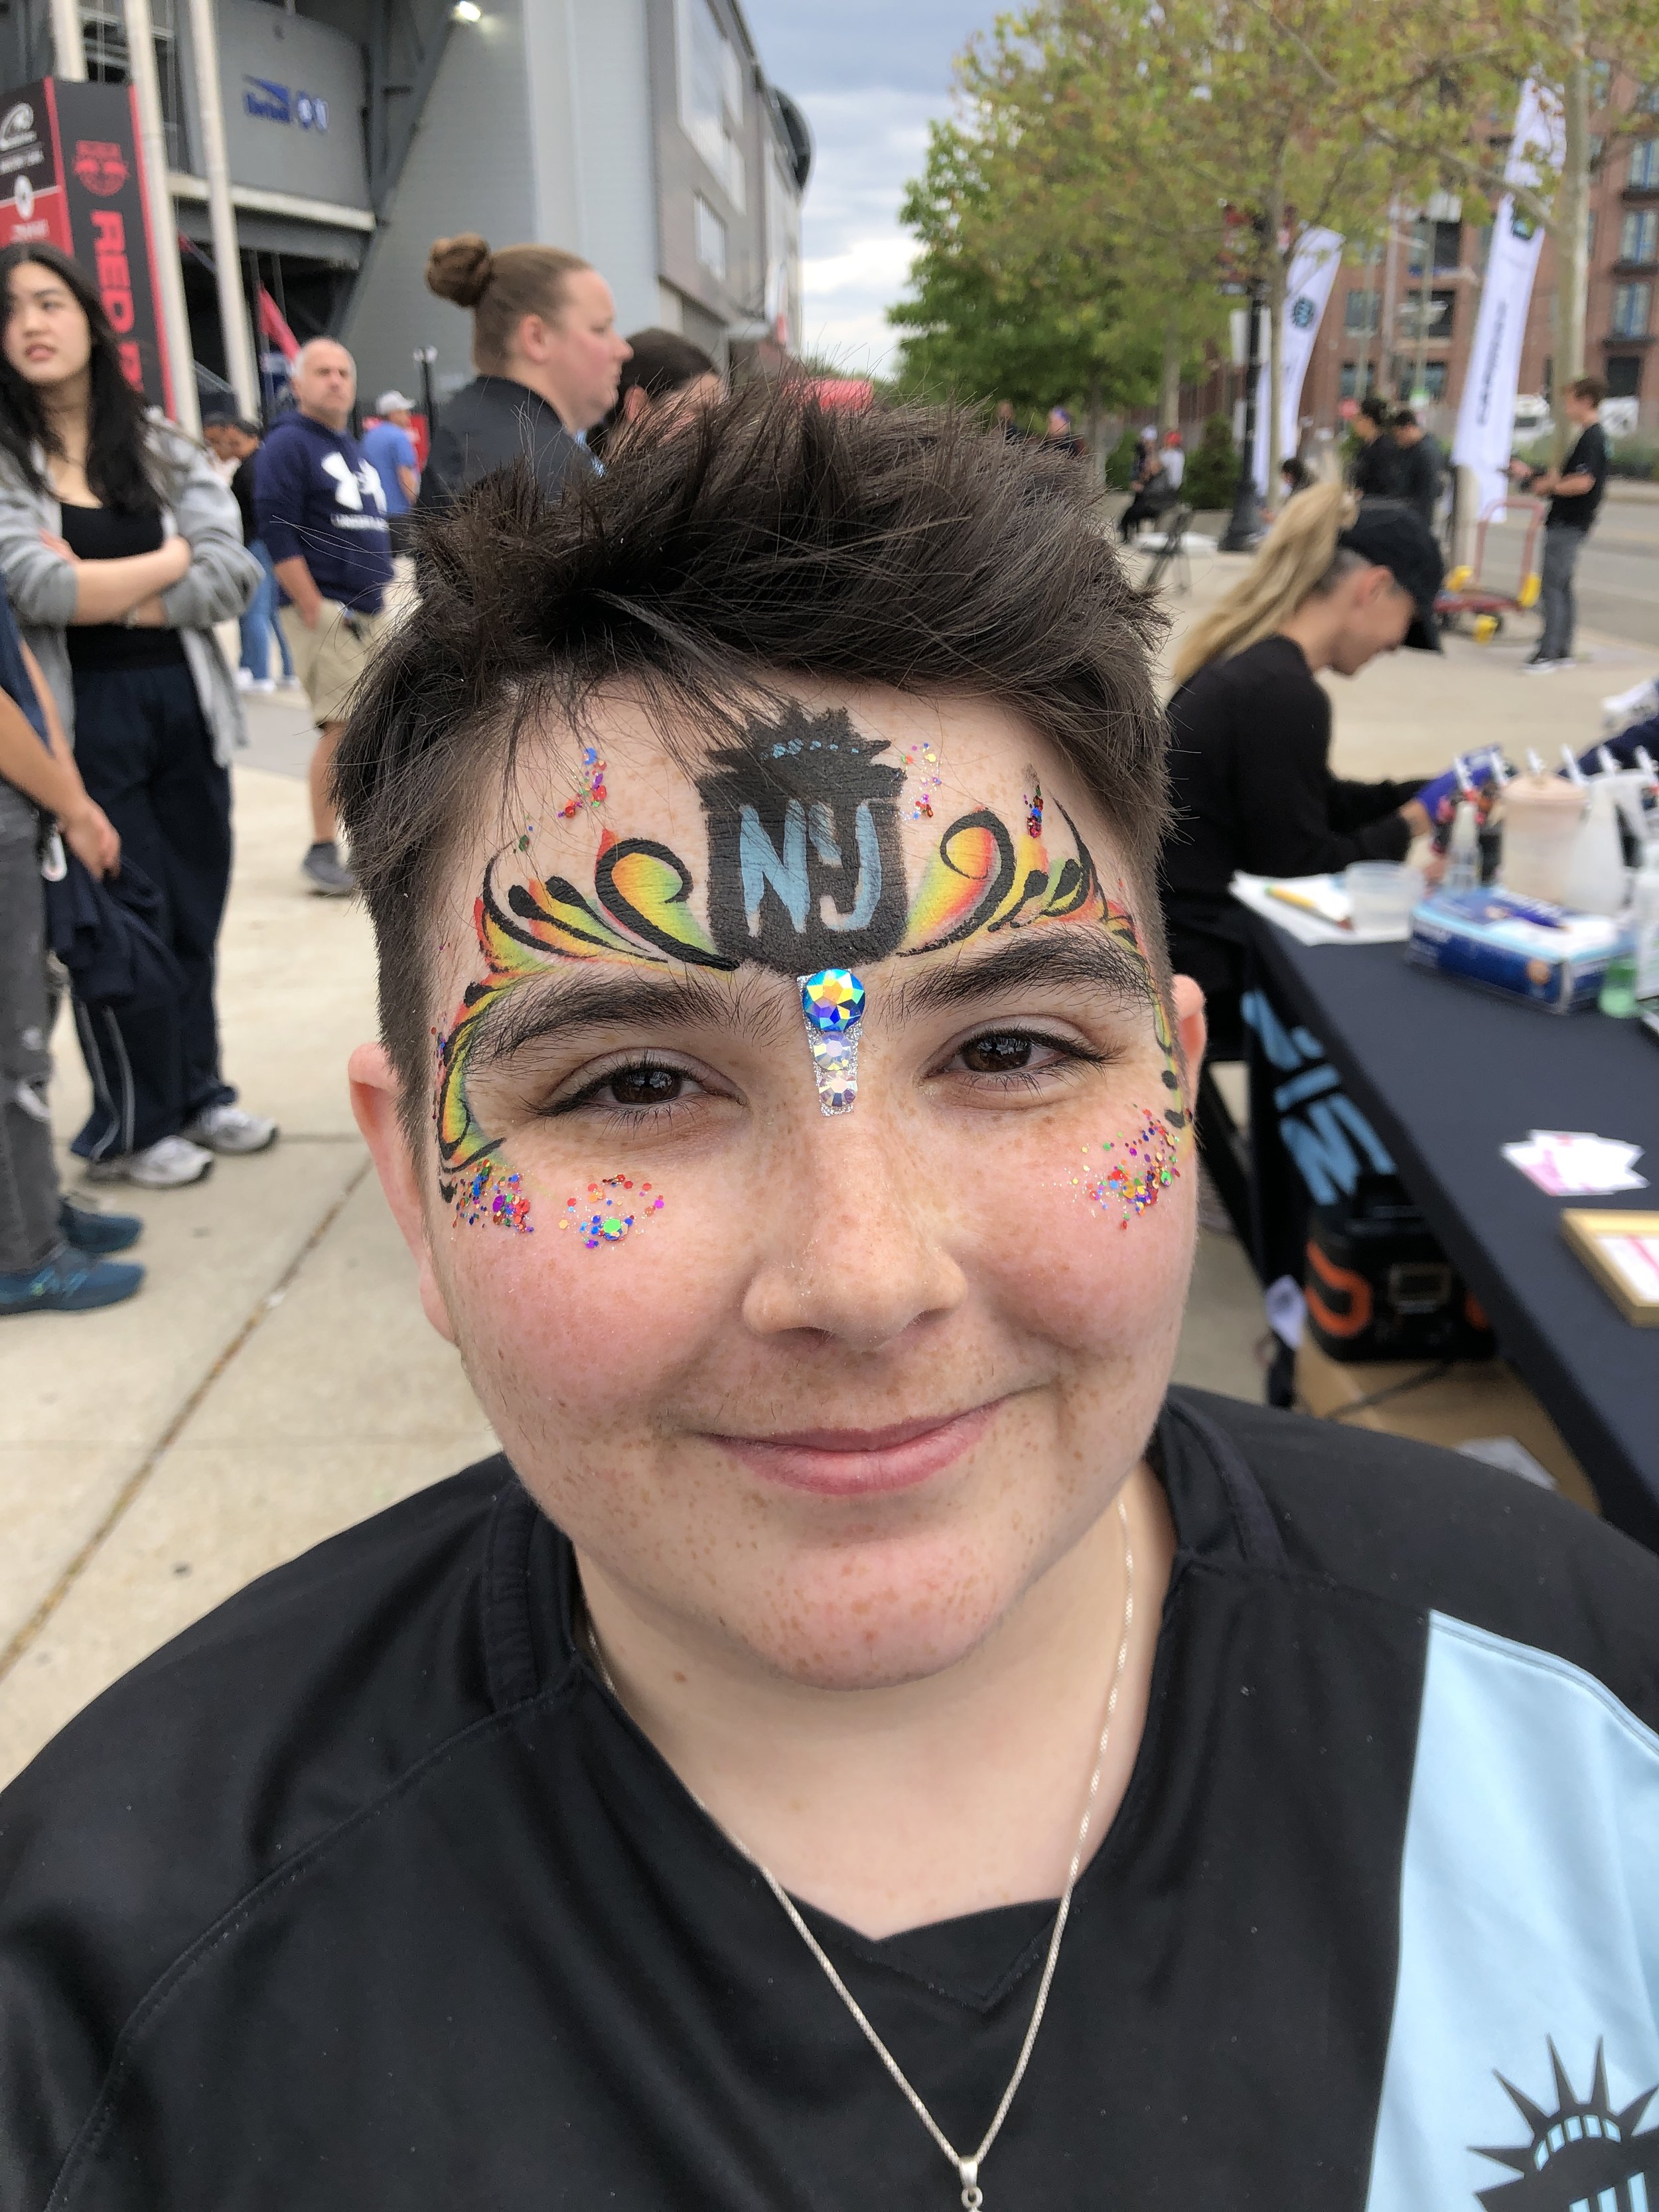 Gotham FC Pride Event Near Me Redbull Arena New Jersey Face Painting.JPG